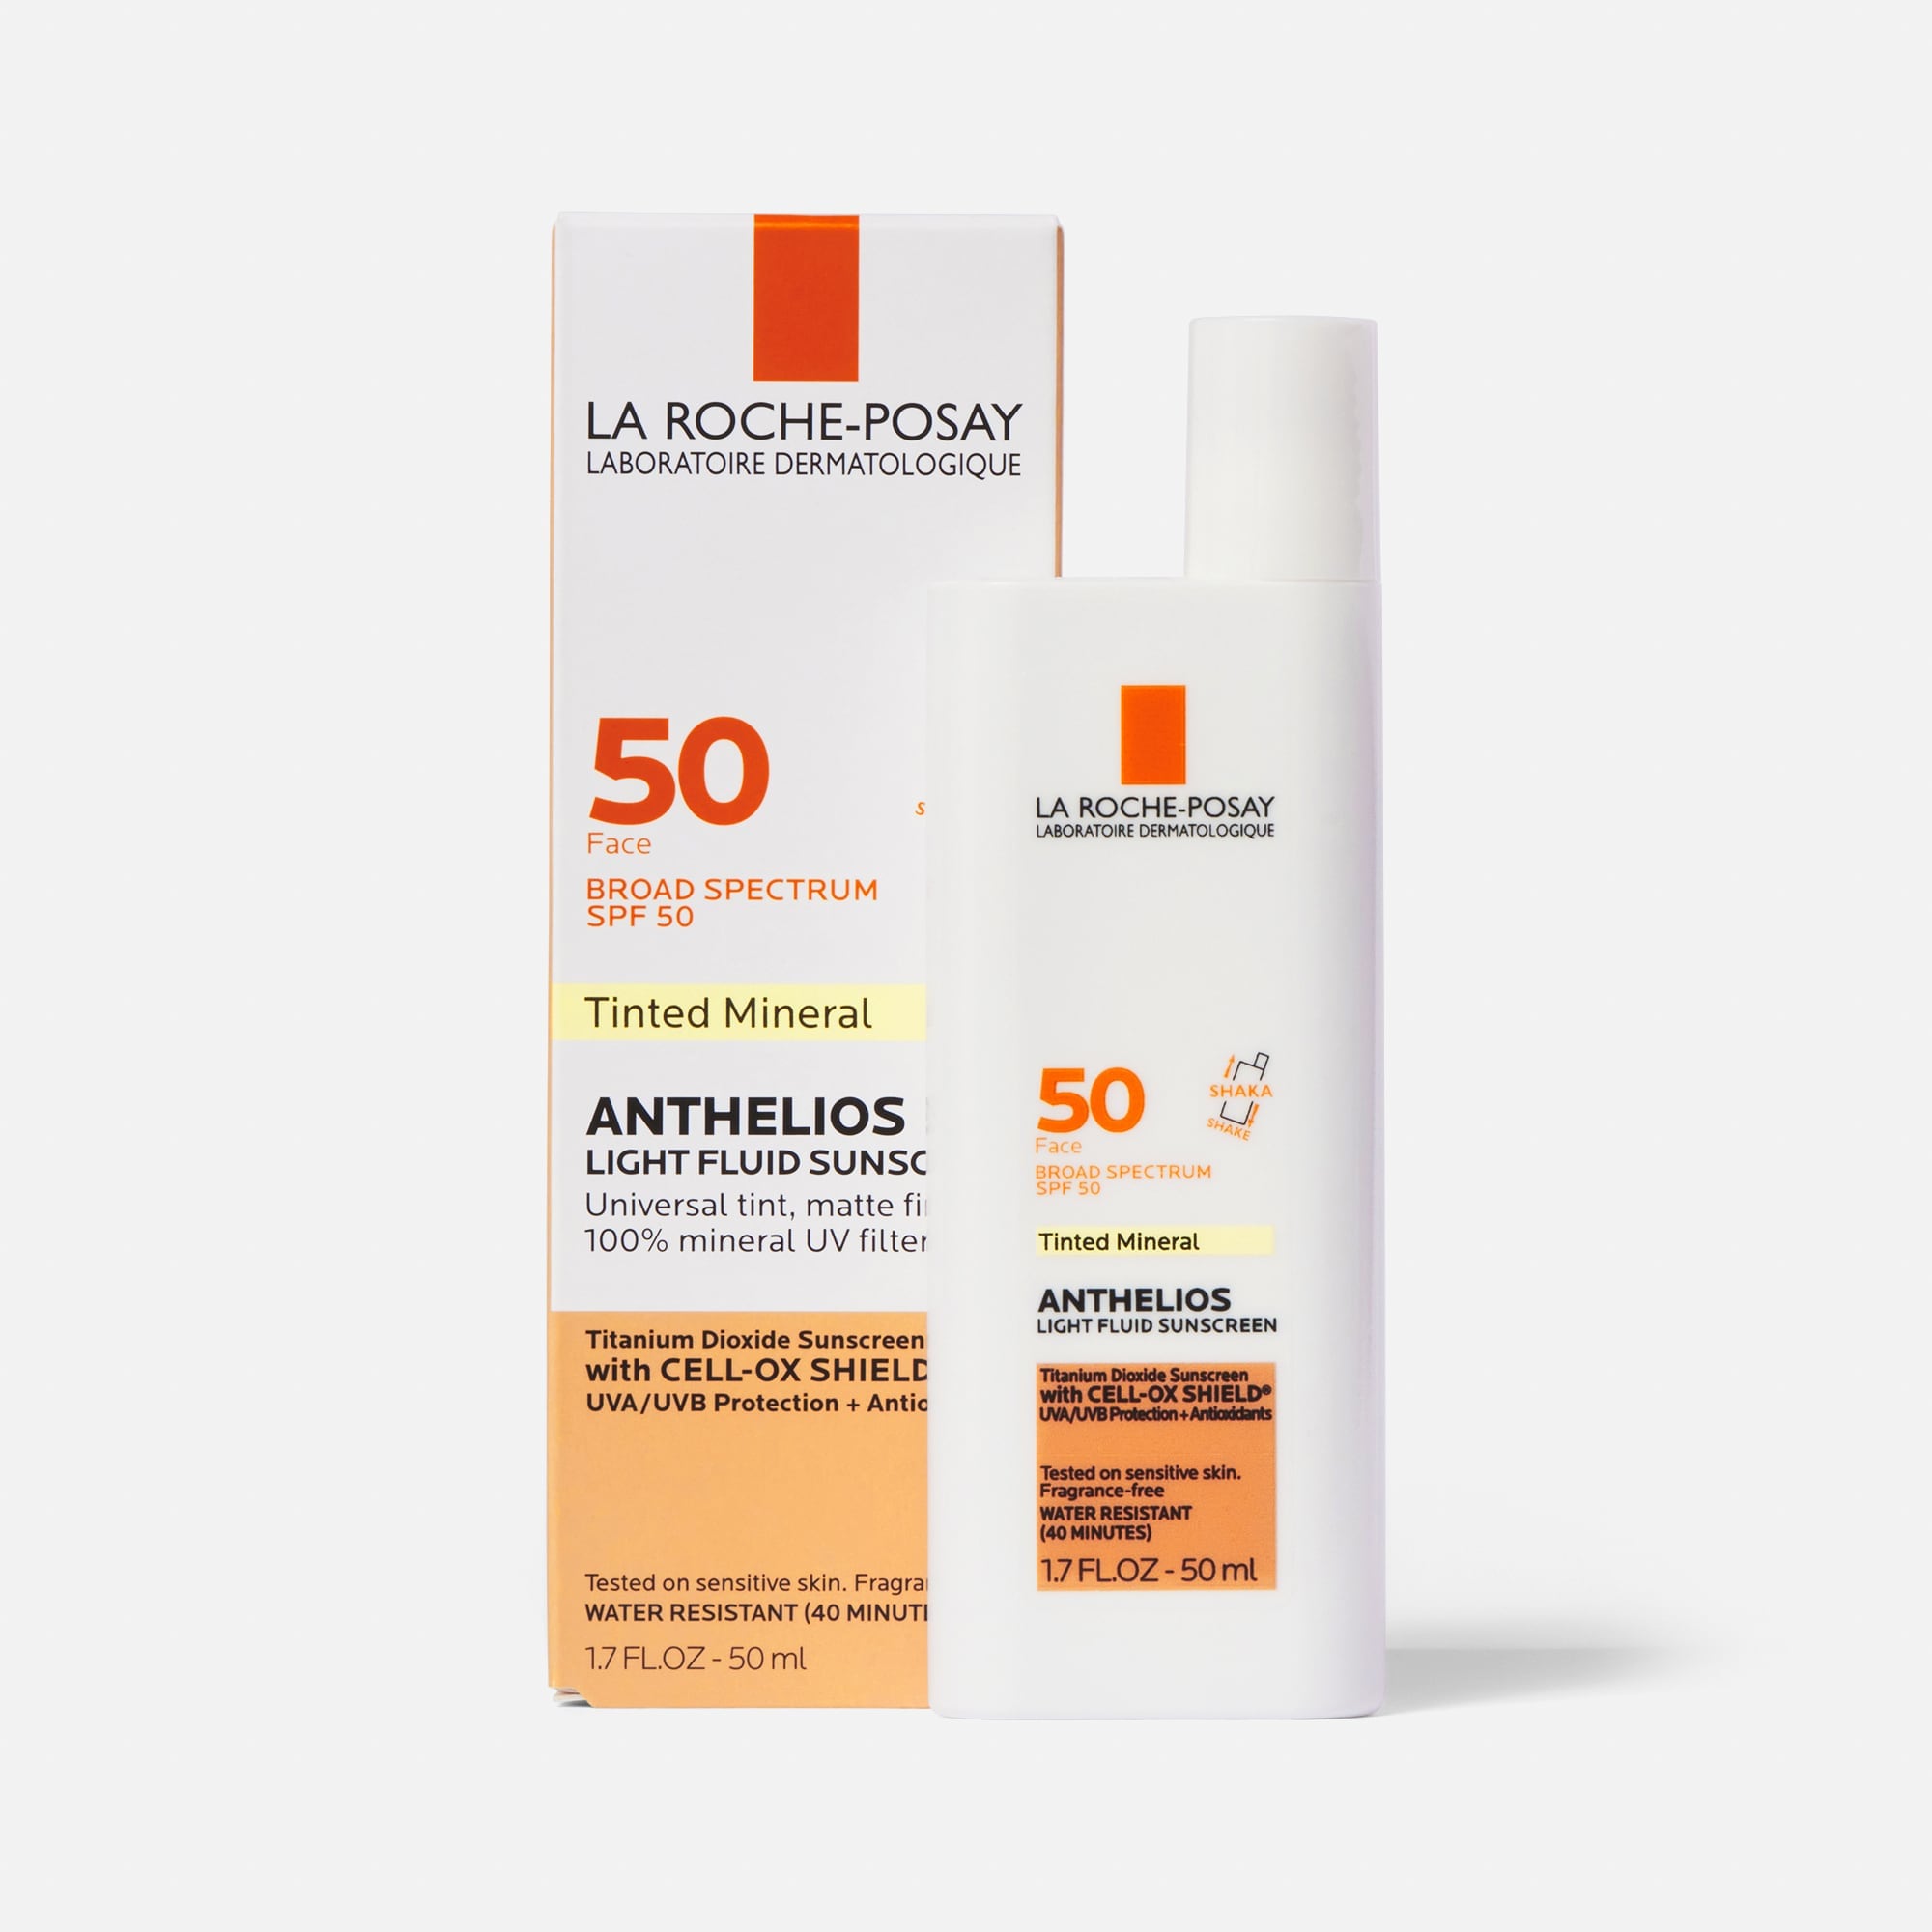 La Roche-Posay Anthelios 50 Mineral Tinted for Face, Ultra-Light Fluid SPF 50 with Antioxidants, 1.7